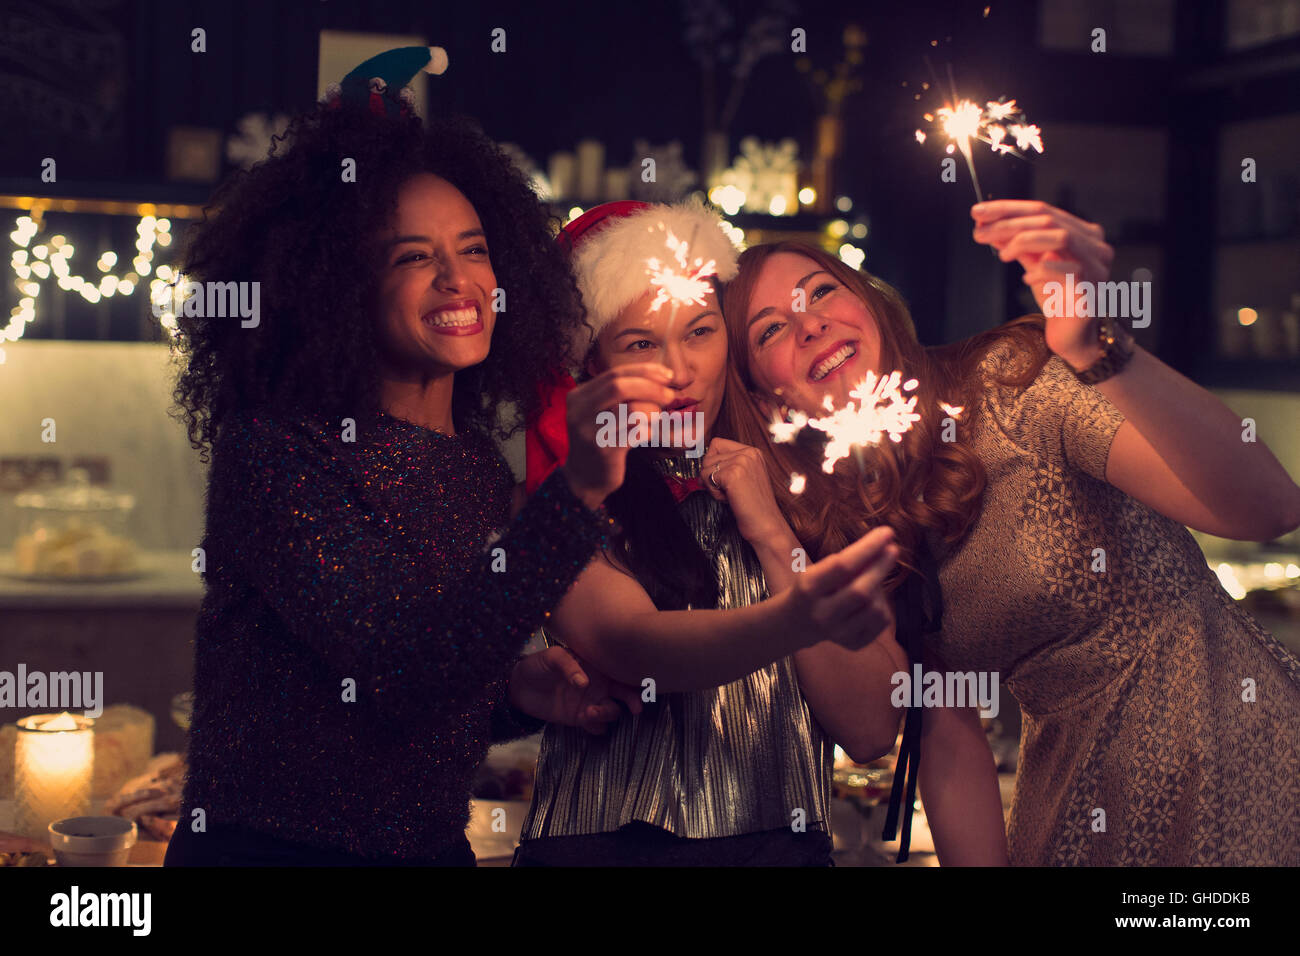 Playful young women with sparklers Stock Photo